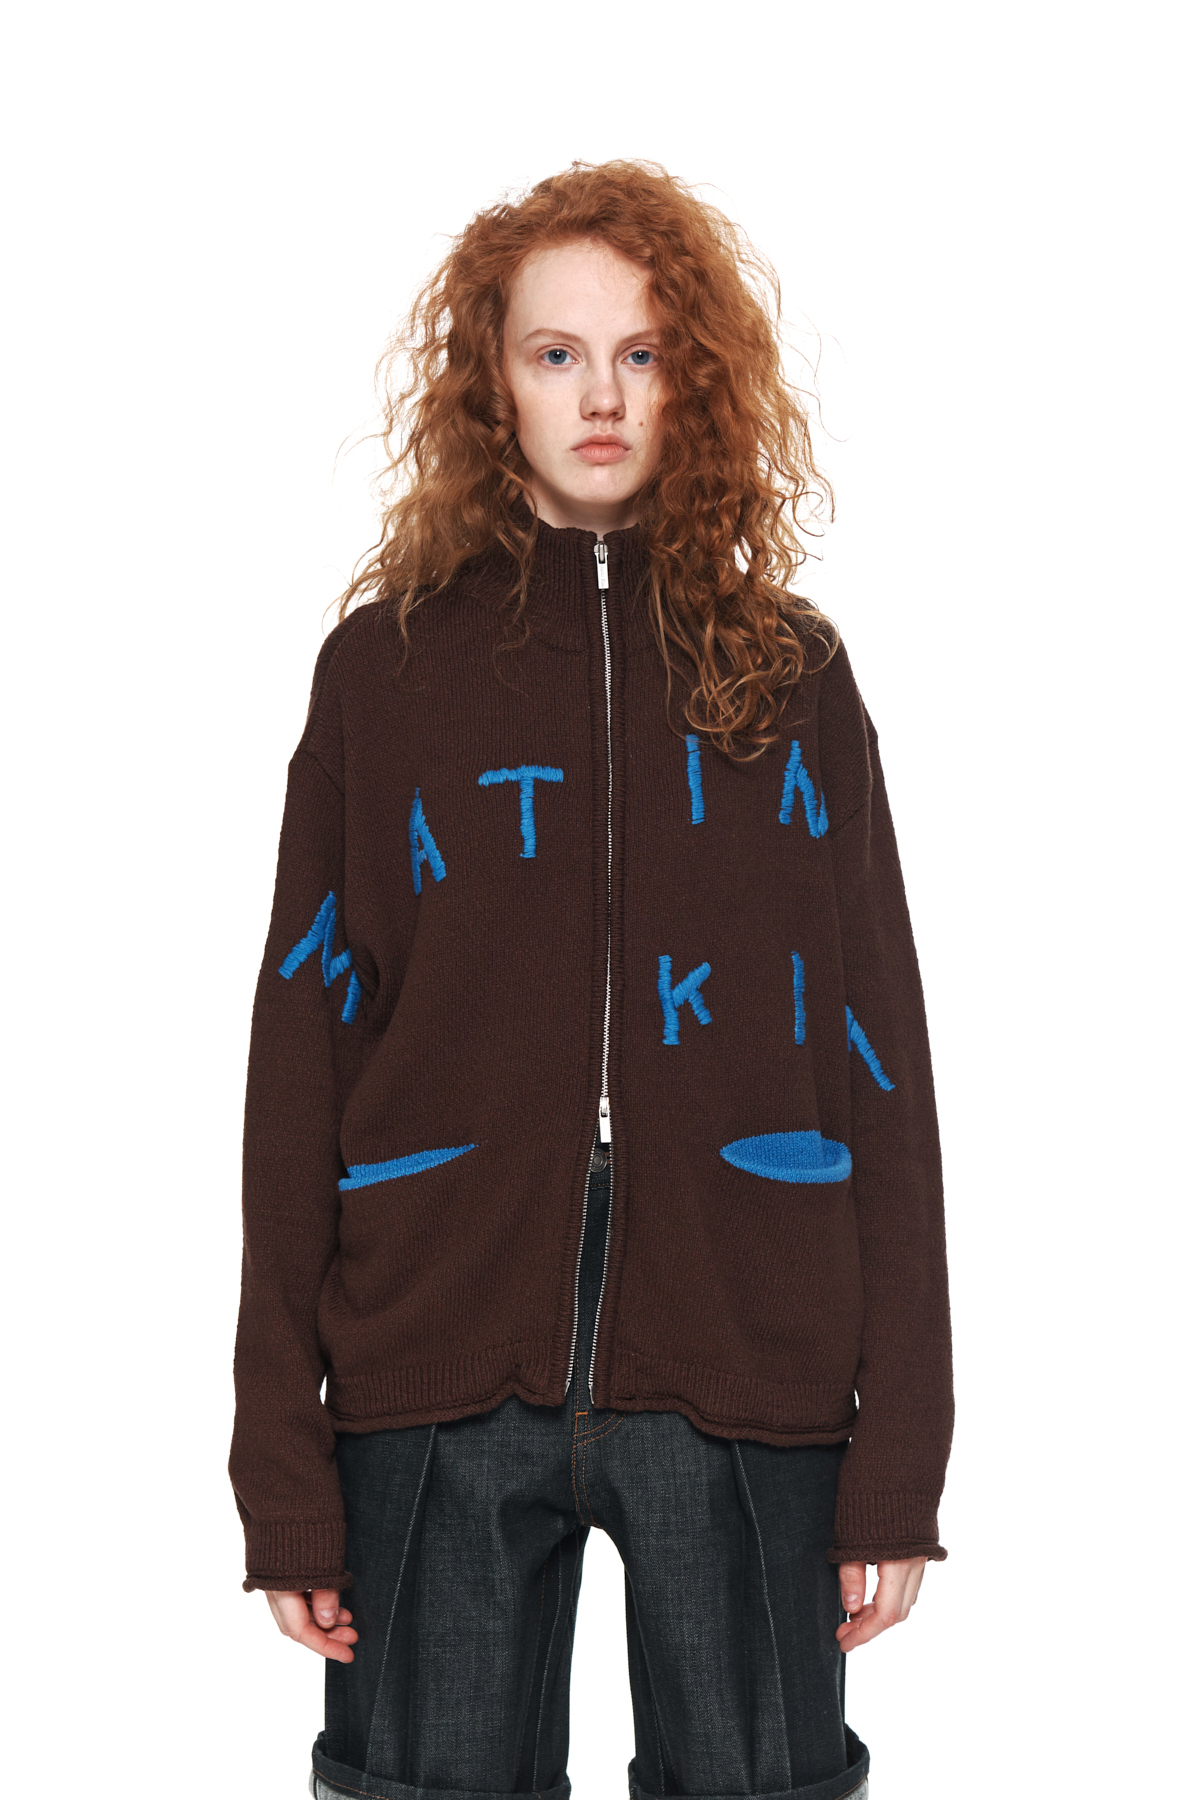 EMBROIDERY LOGO KNIT ZIP UP IN BROWN